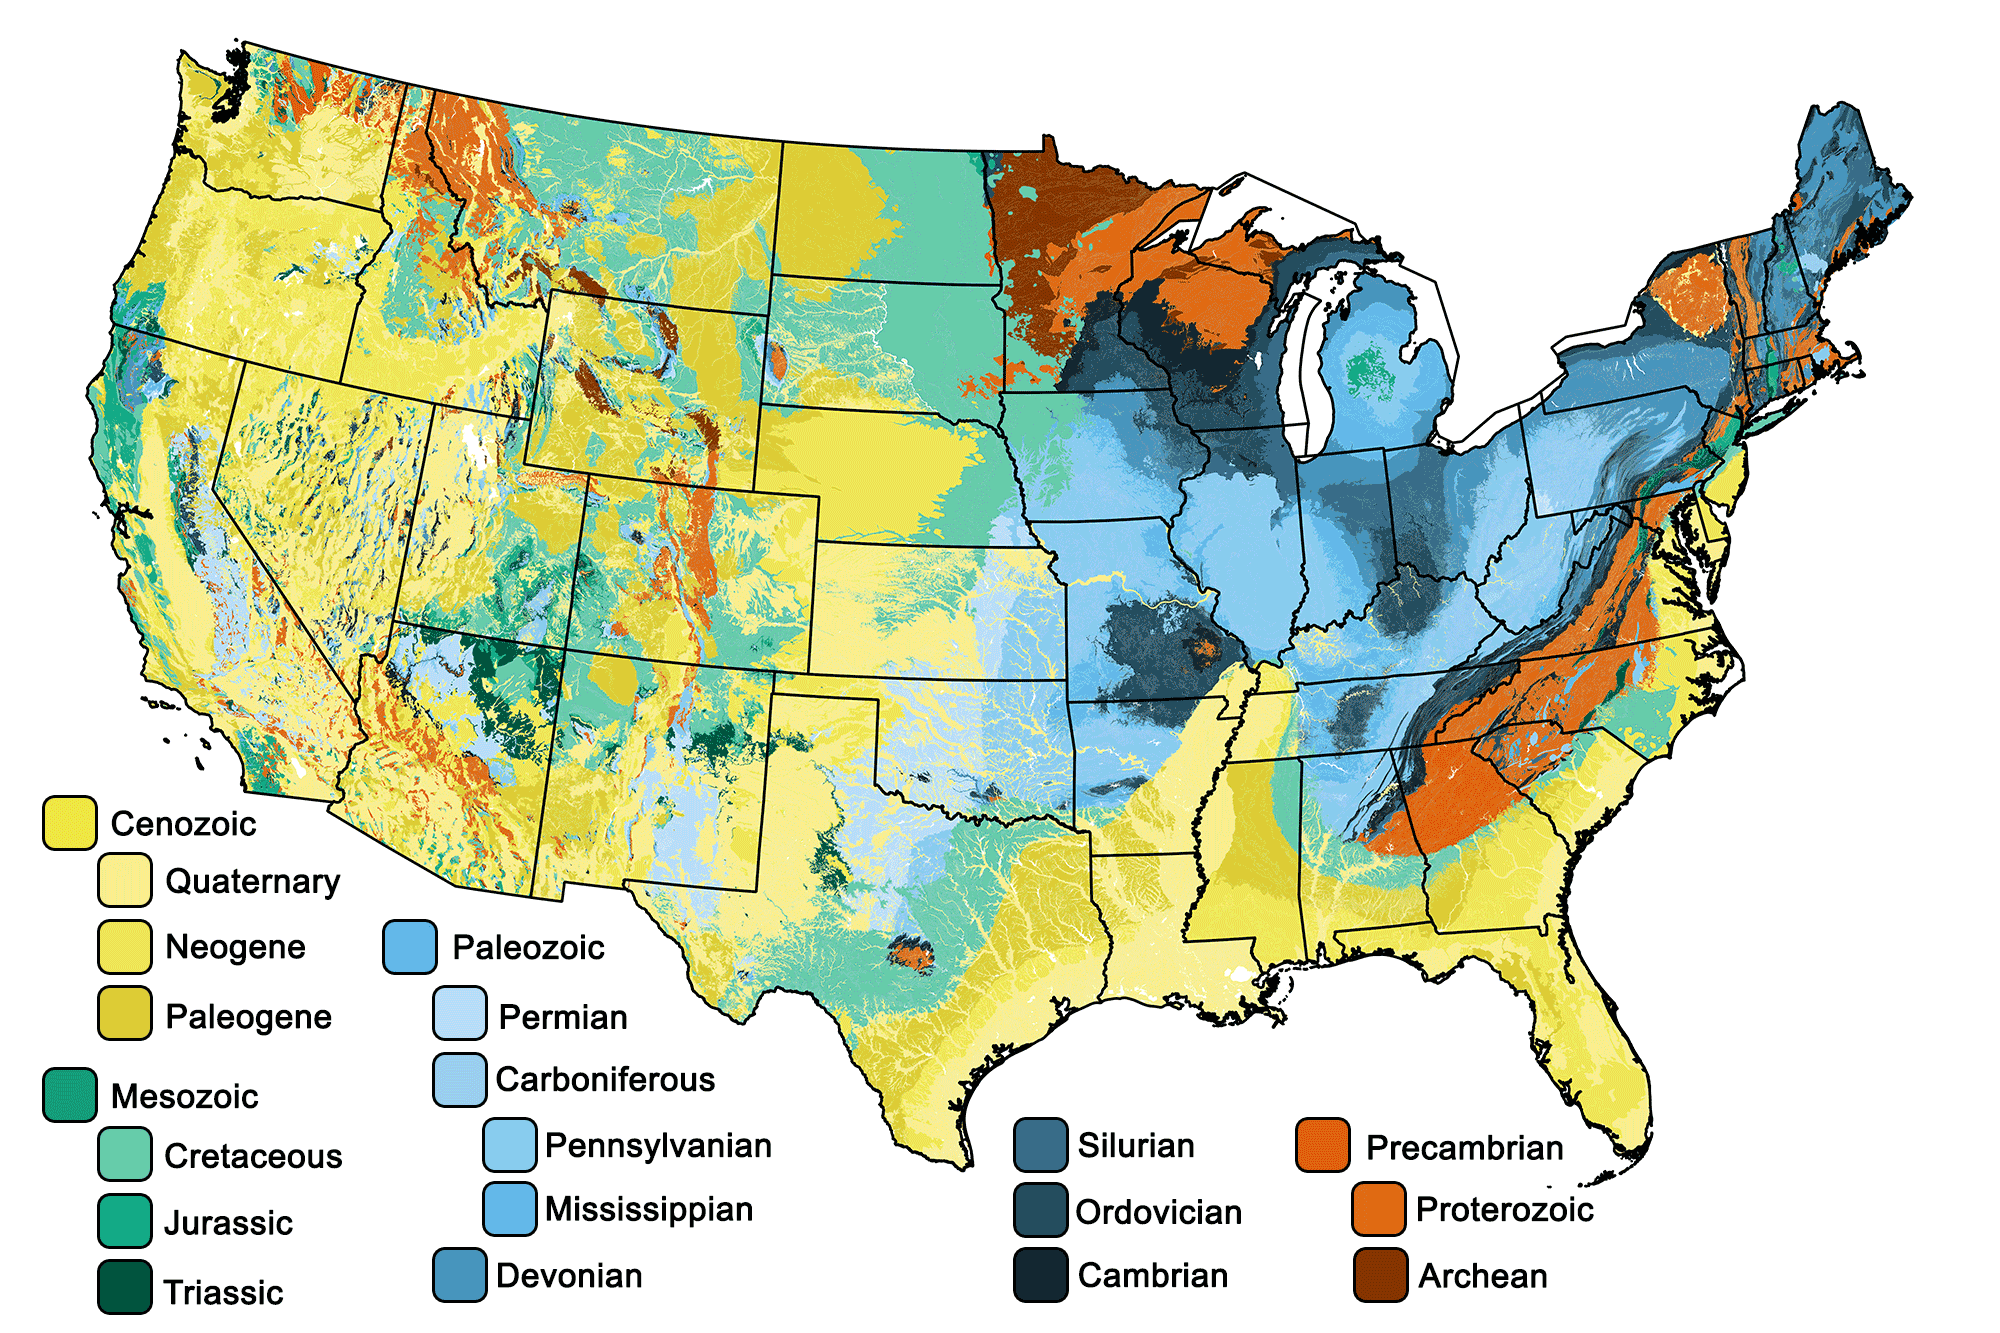 Geologic map of the United States.